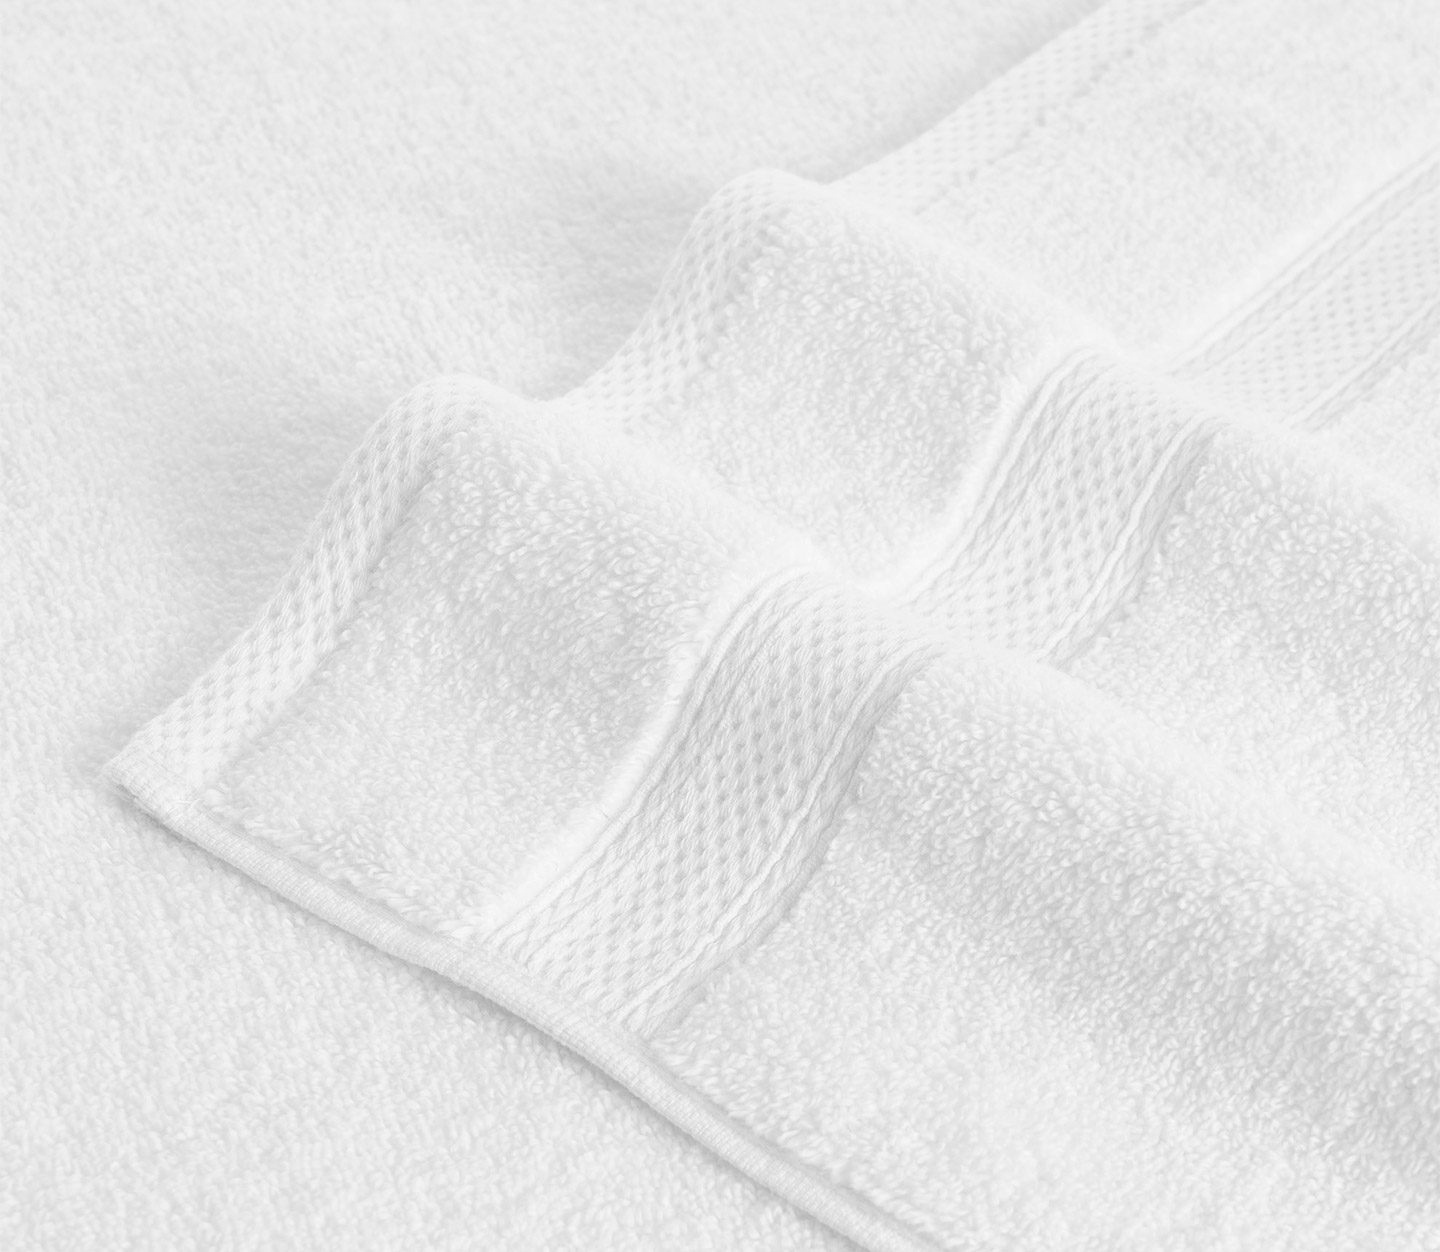 Texdata International - Towels by Loftex China Ltd. are “Made in